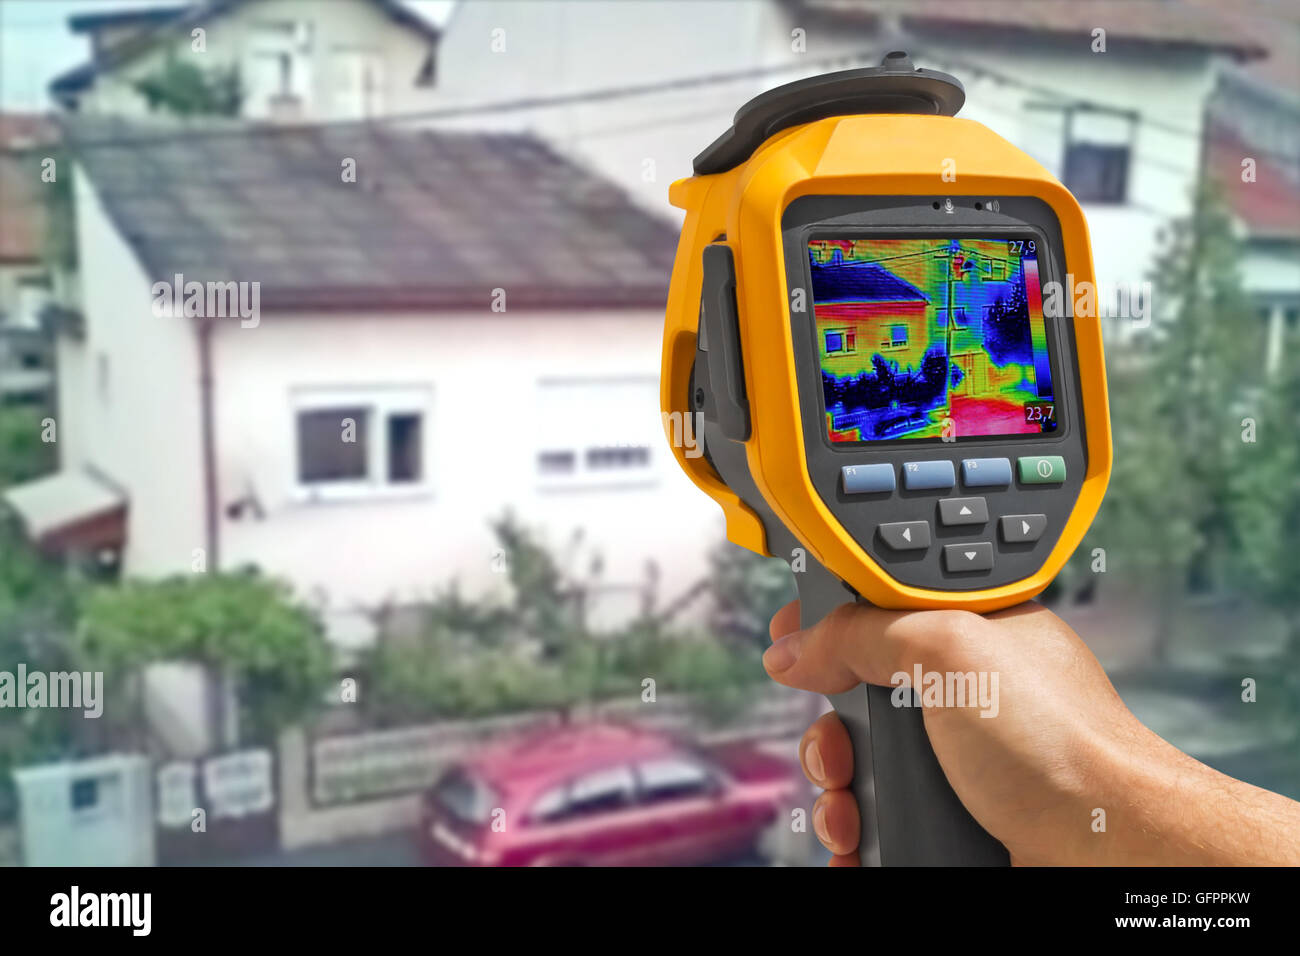 Recording Heat Loss at the Residential Building With Infrared Thermal Camera Stock Photo